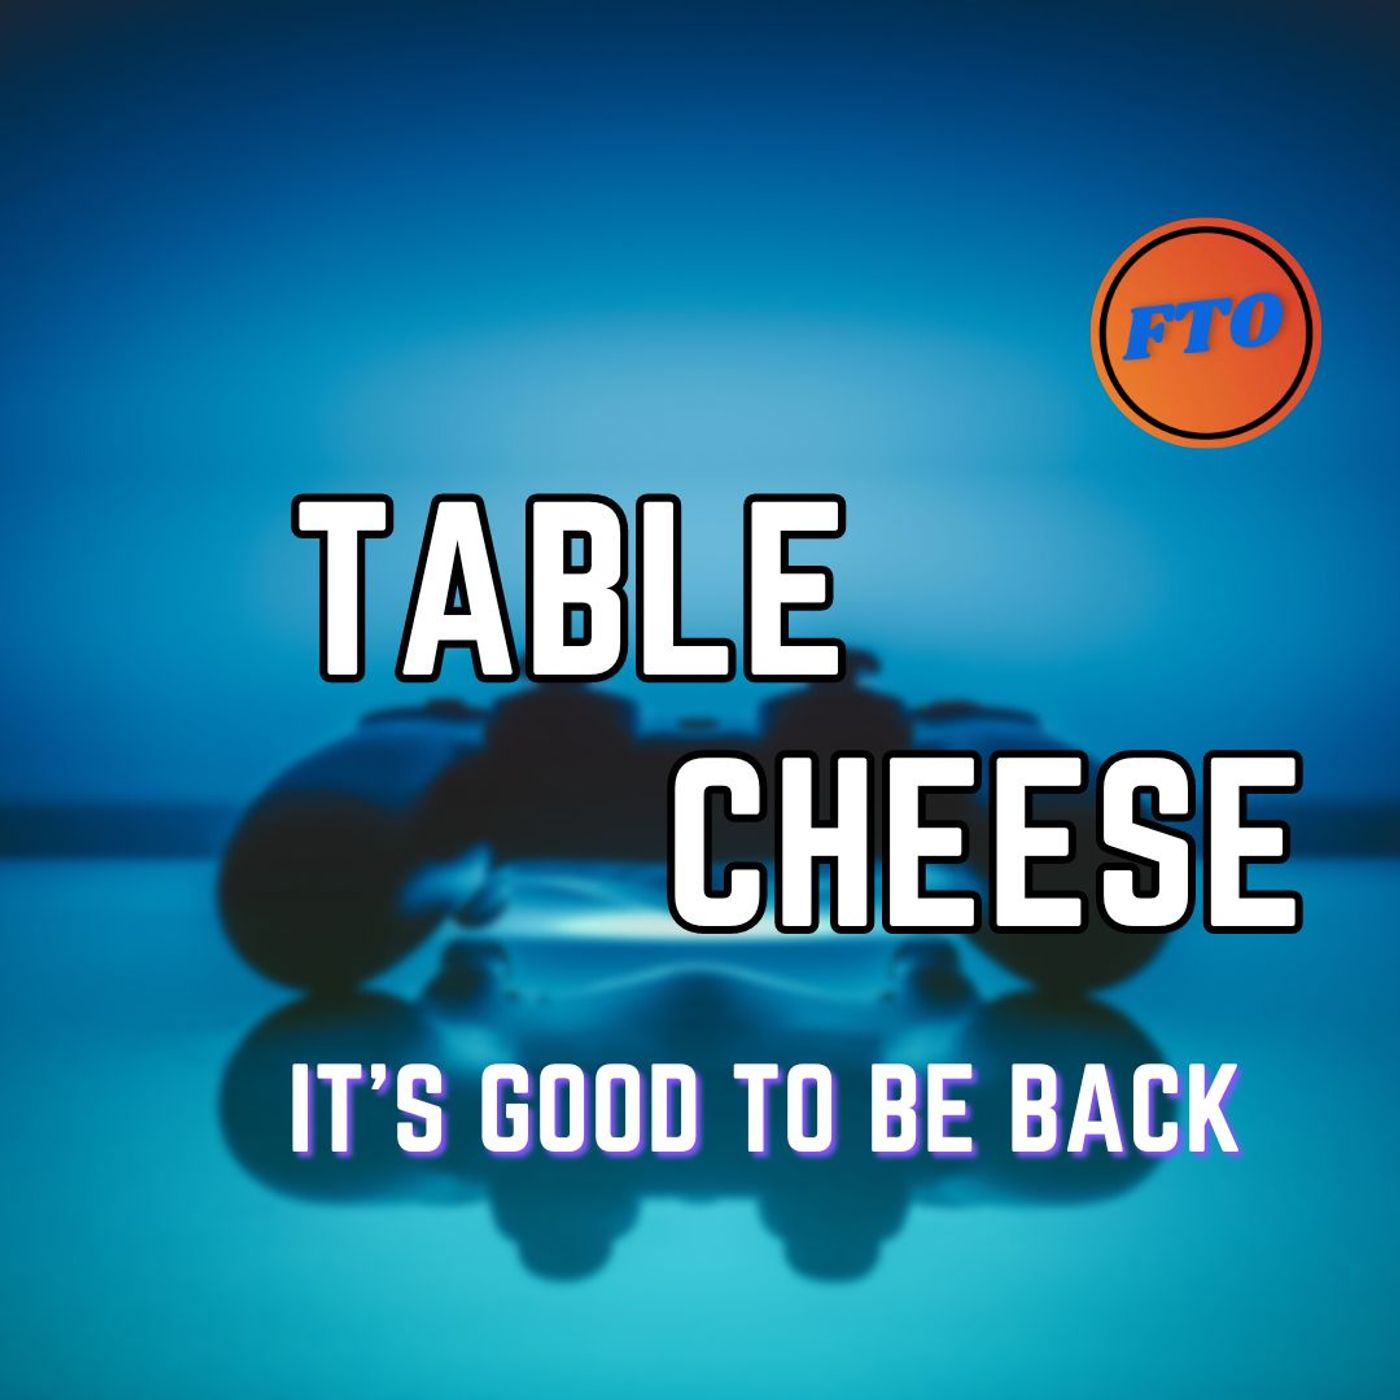 Table Cheese eps 41 - It’s Good To Be Back